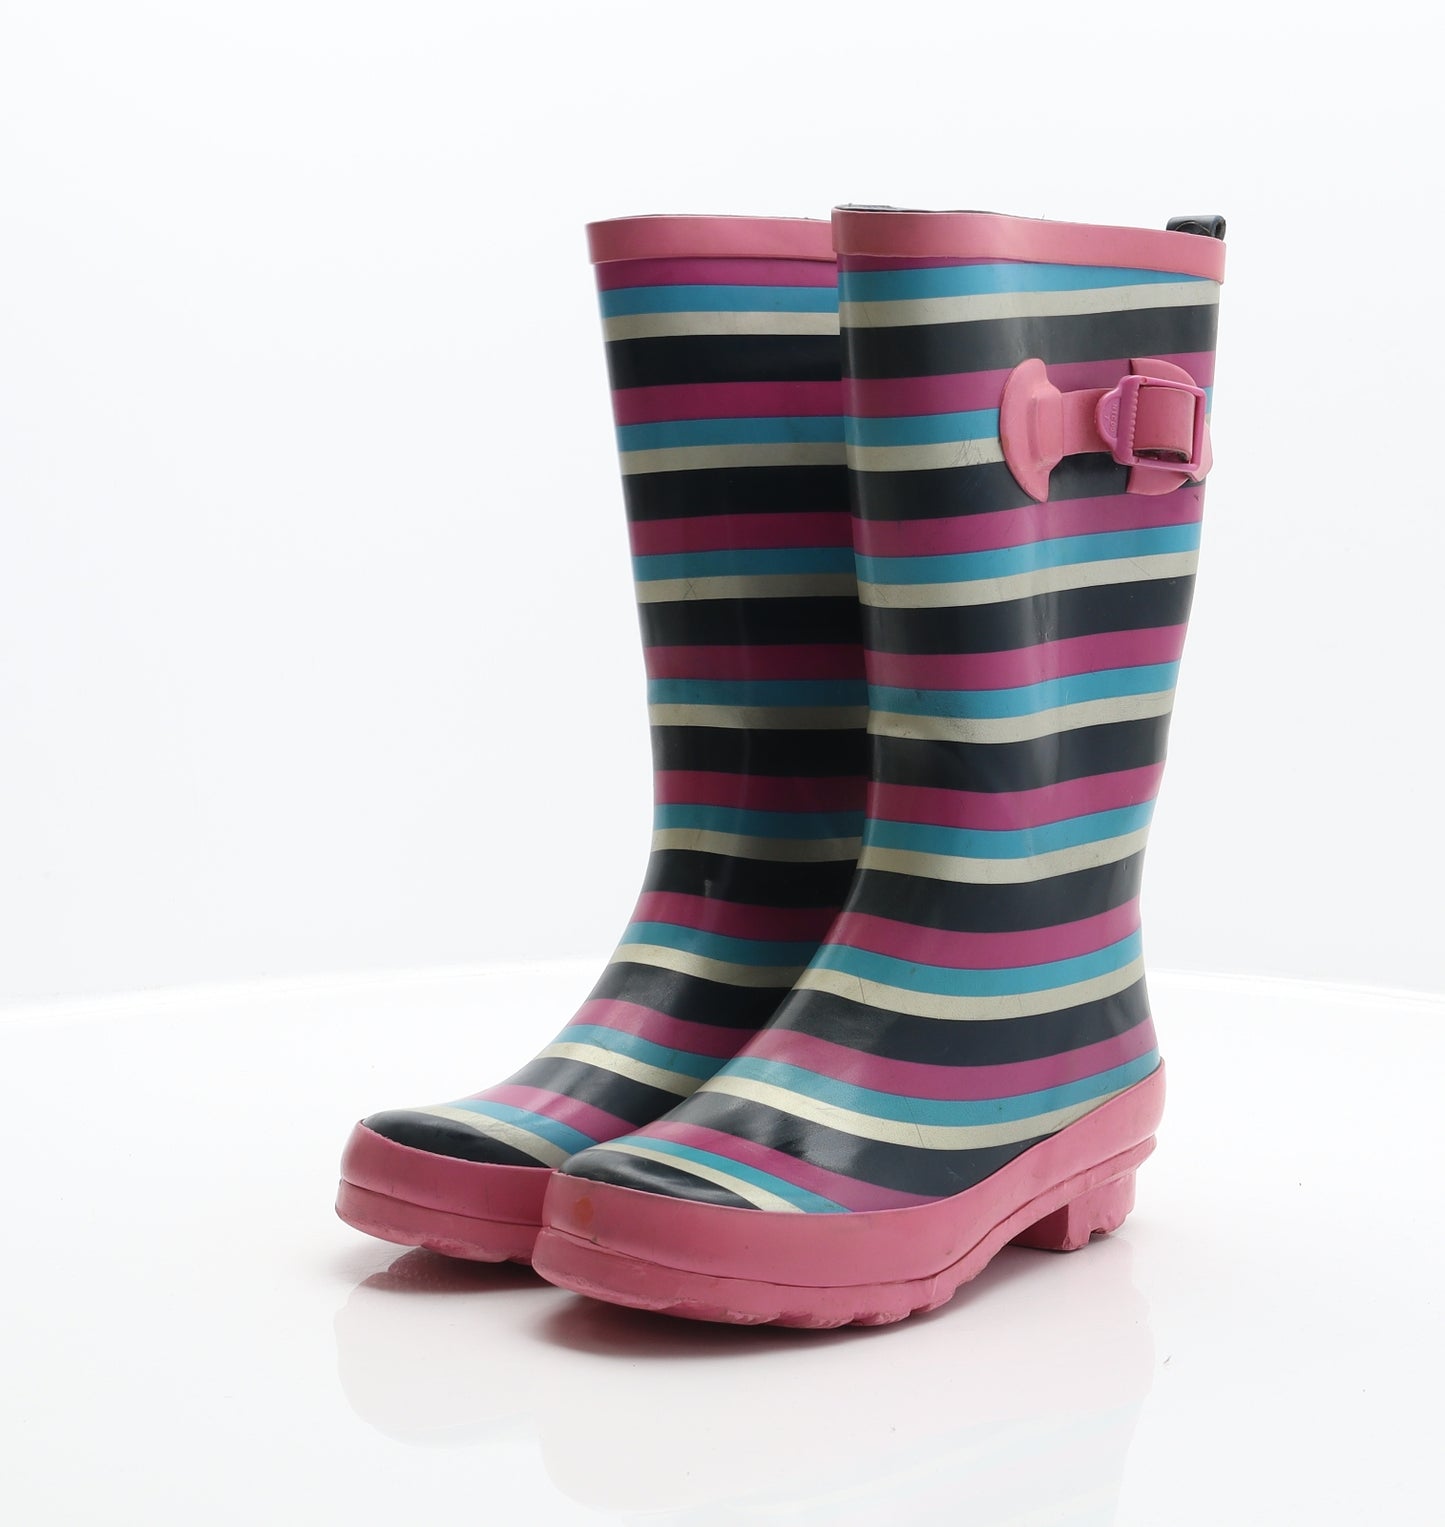 Preworn Womens Multicoloured Striped Synthetic Wellies Boot UK 3